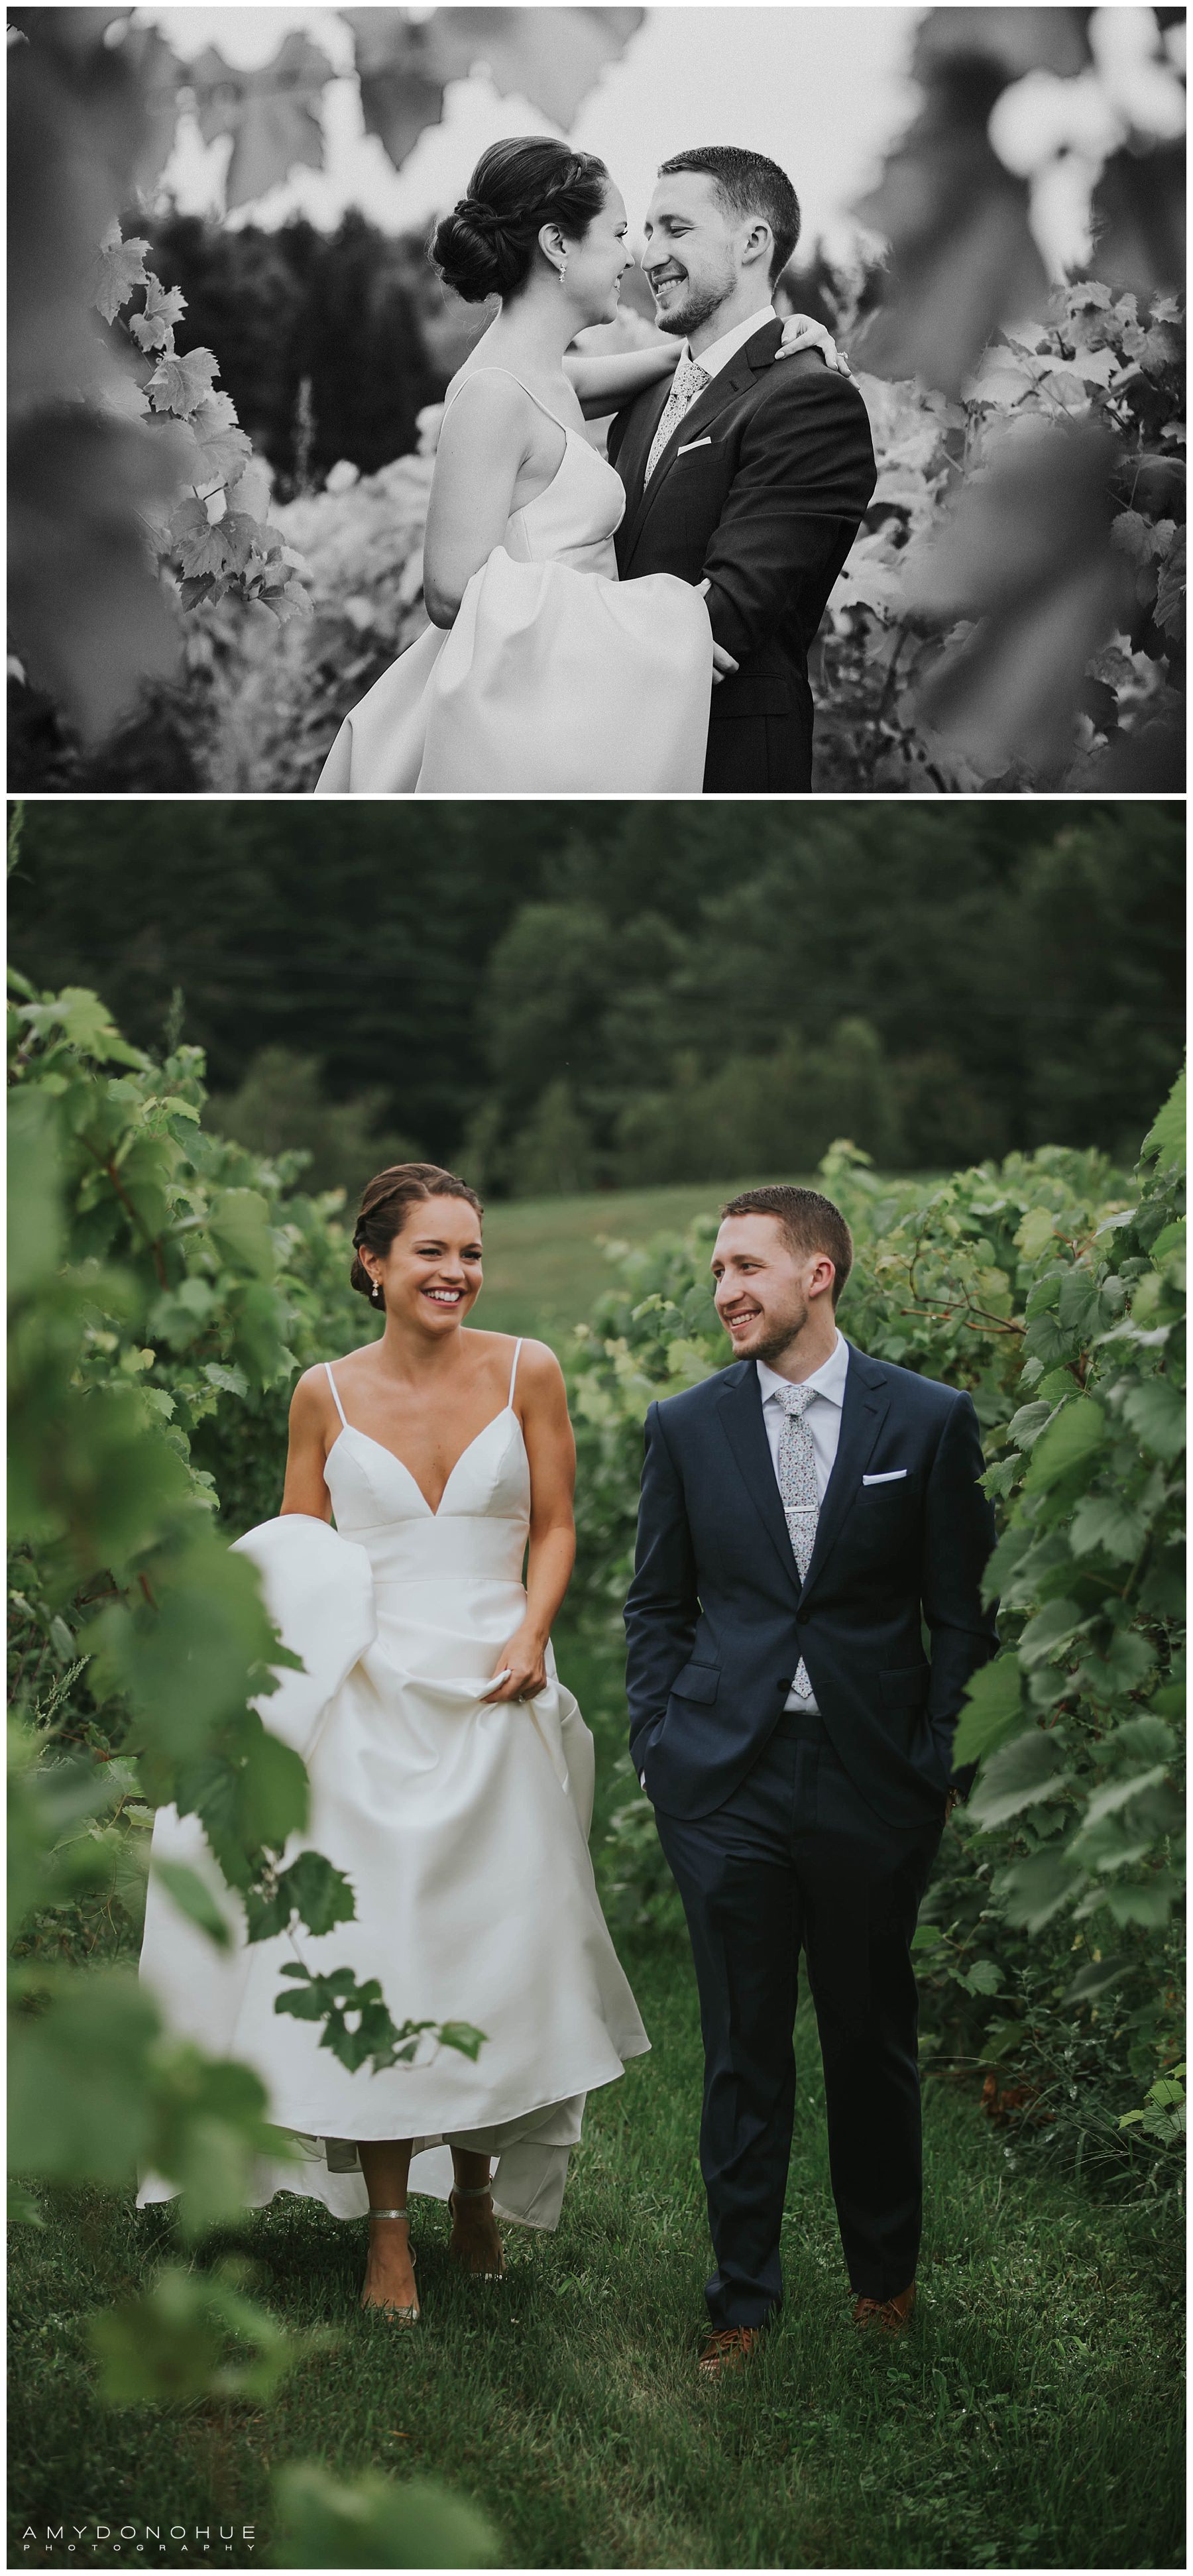 First Look | The Barn at Boyden Farms | Vermont Wedding Photographer | © Amy Donohue Photography